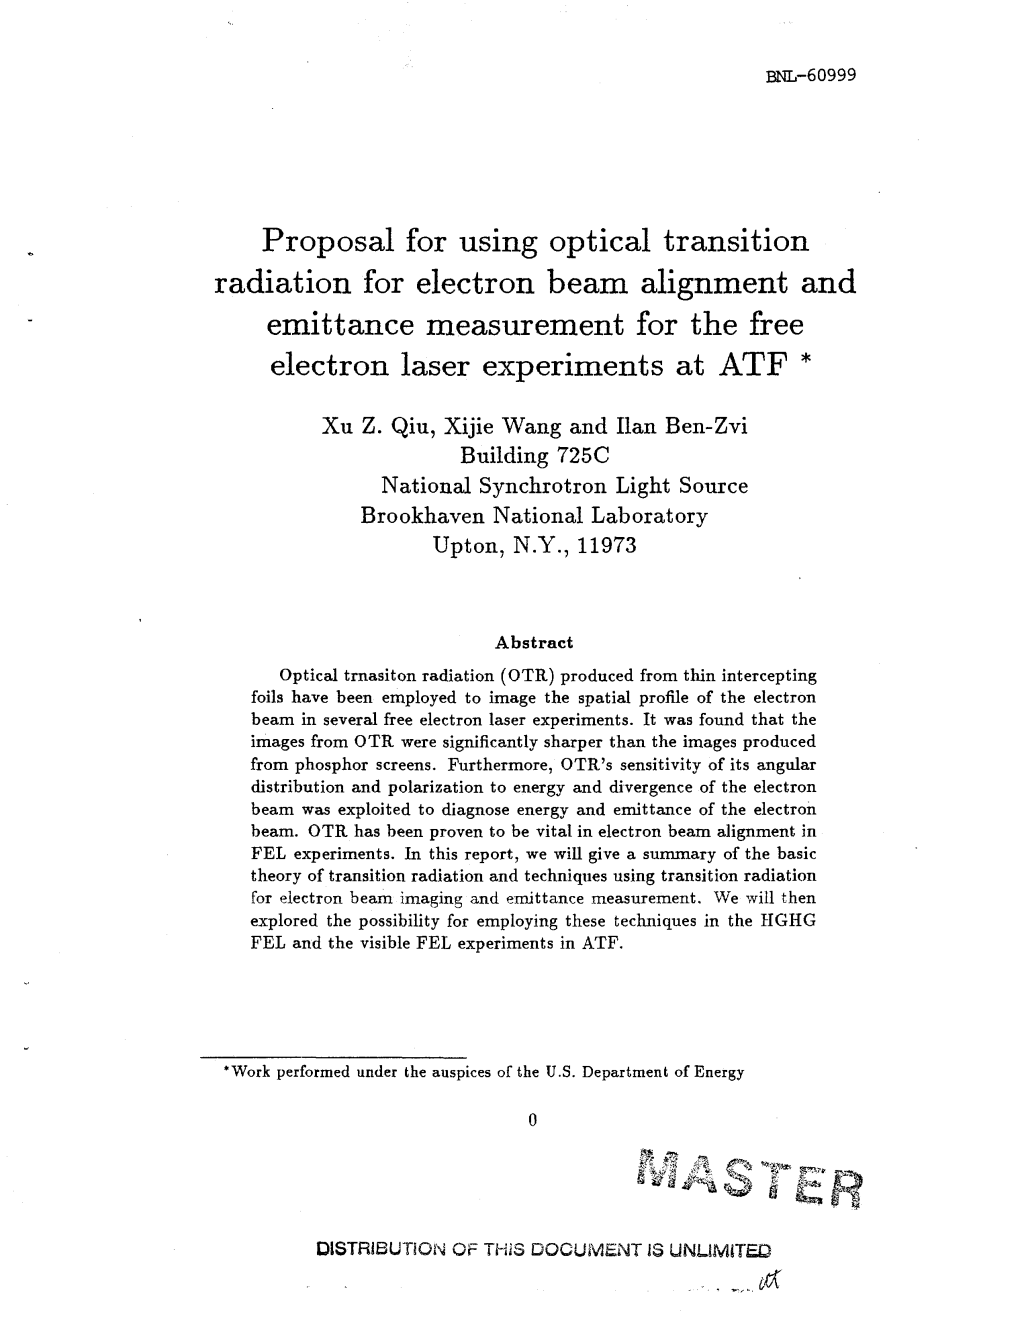 Proposal for Using Optical Transition Radiation for Electron Beam Alignment and Emittance Measurement for the Free Electron Laser Experiments at ATF *